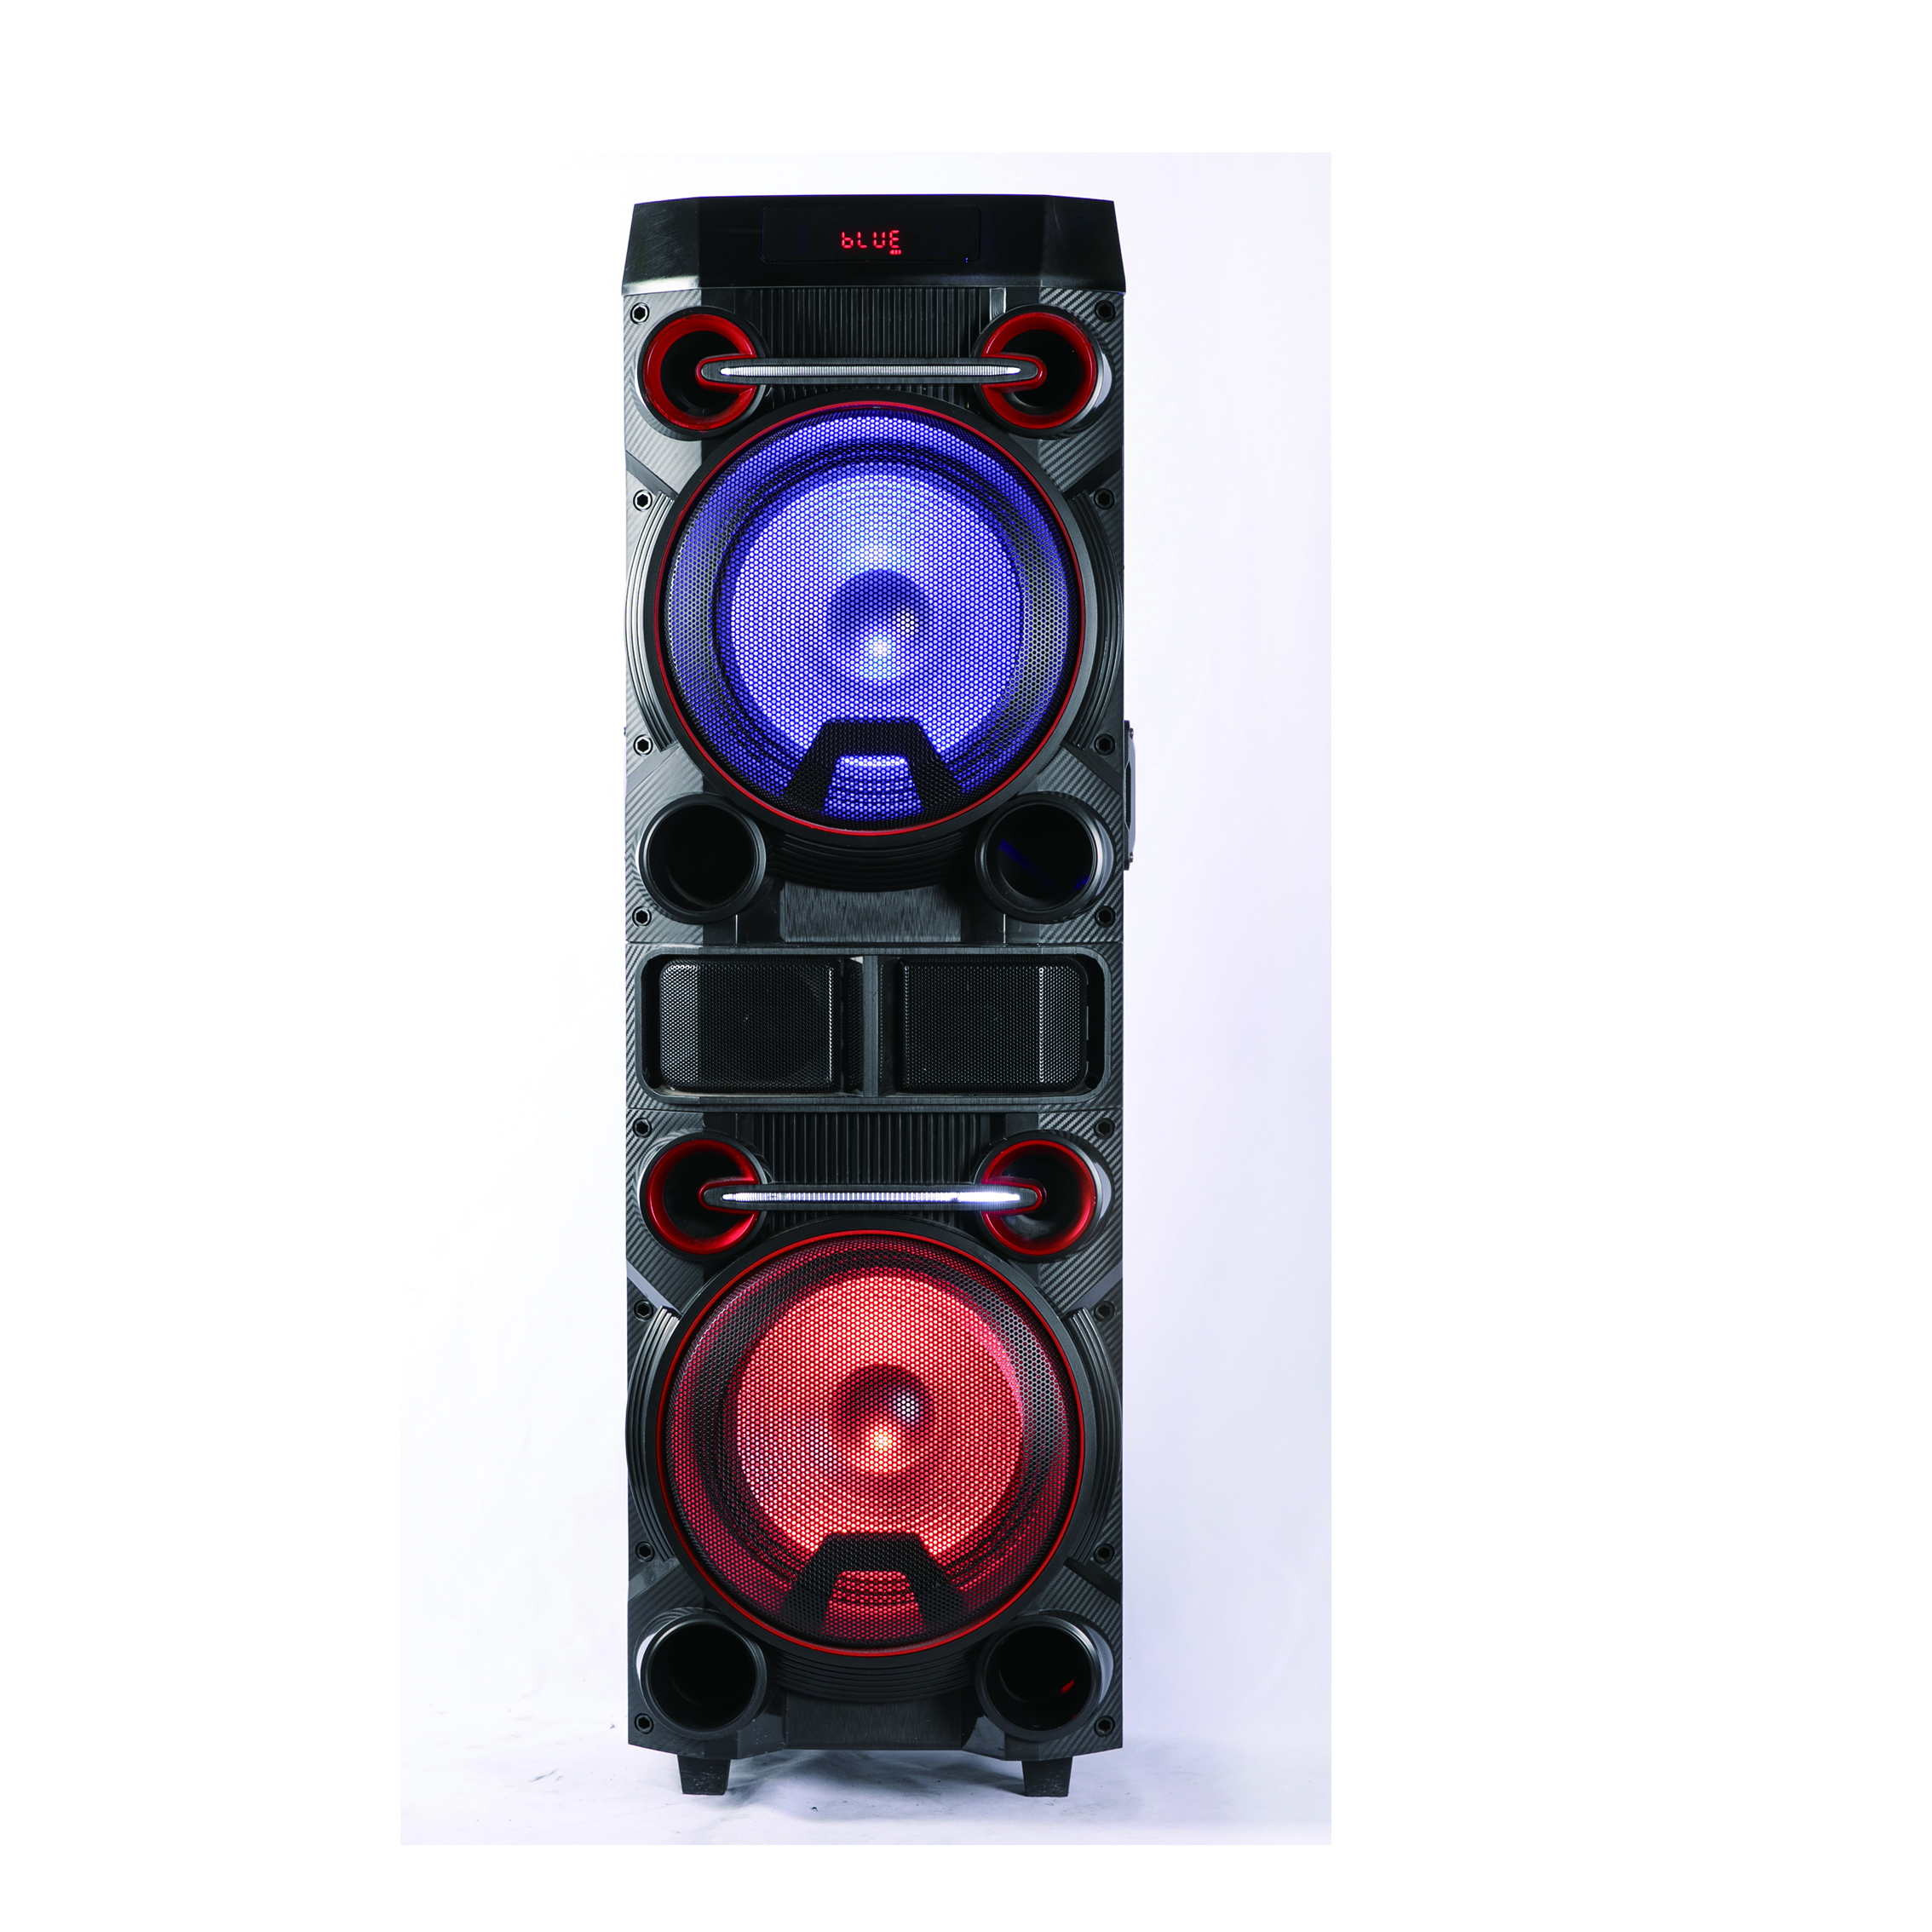 2.0 STAGE SPEAKER SUPER BASS WITH PRIVATE DESIGN